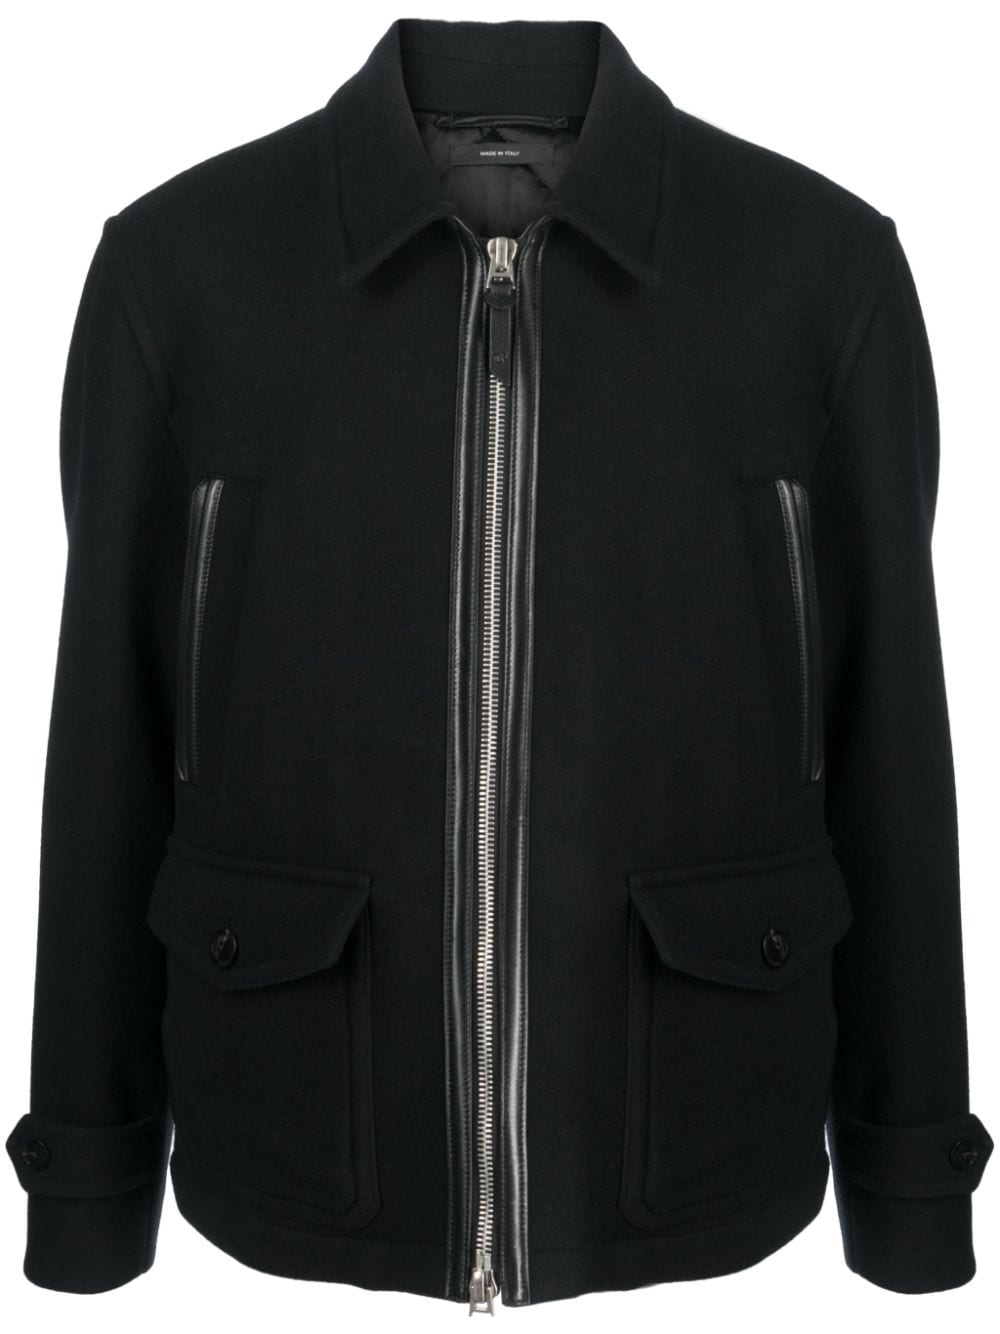 TOM FORD double face wool jacket - Black von TOM FORD